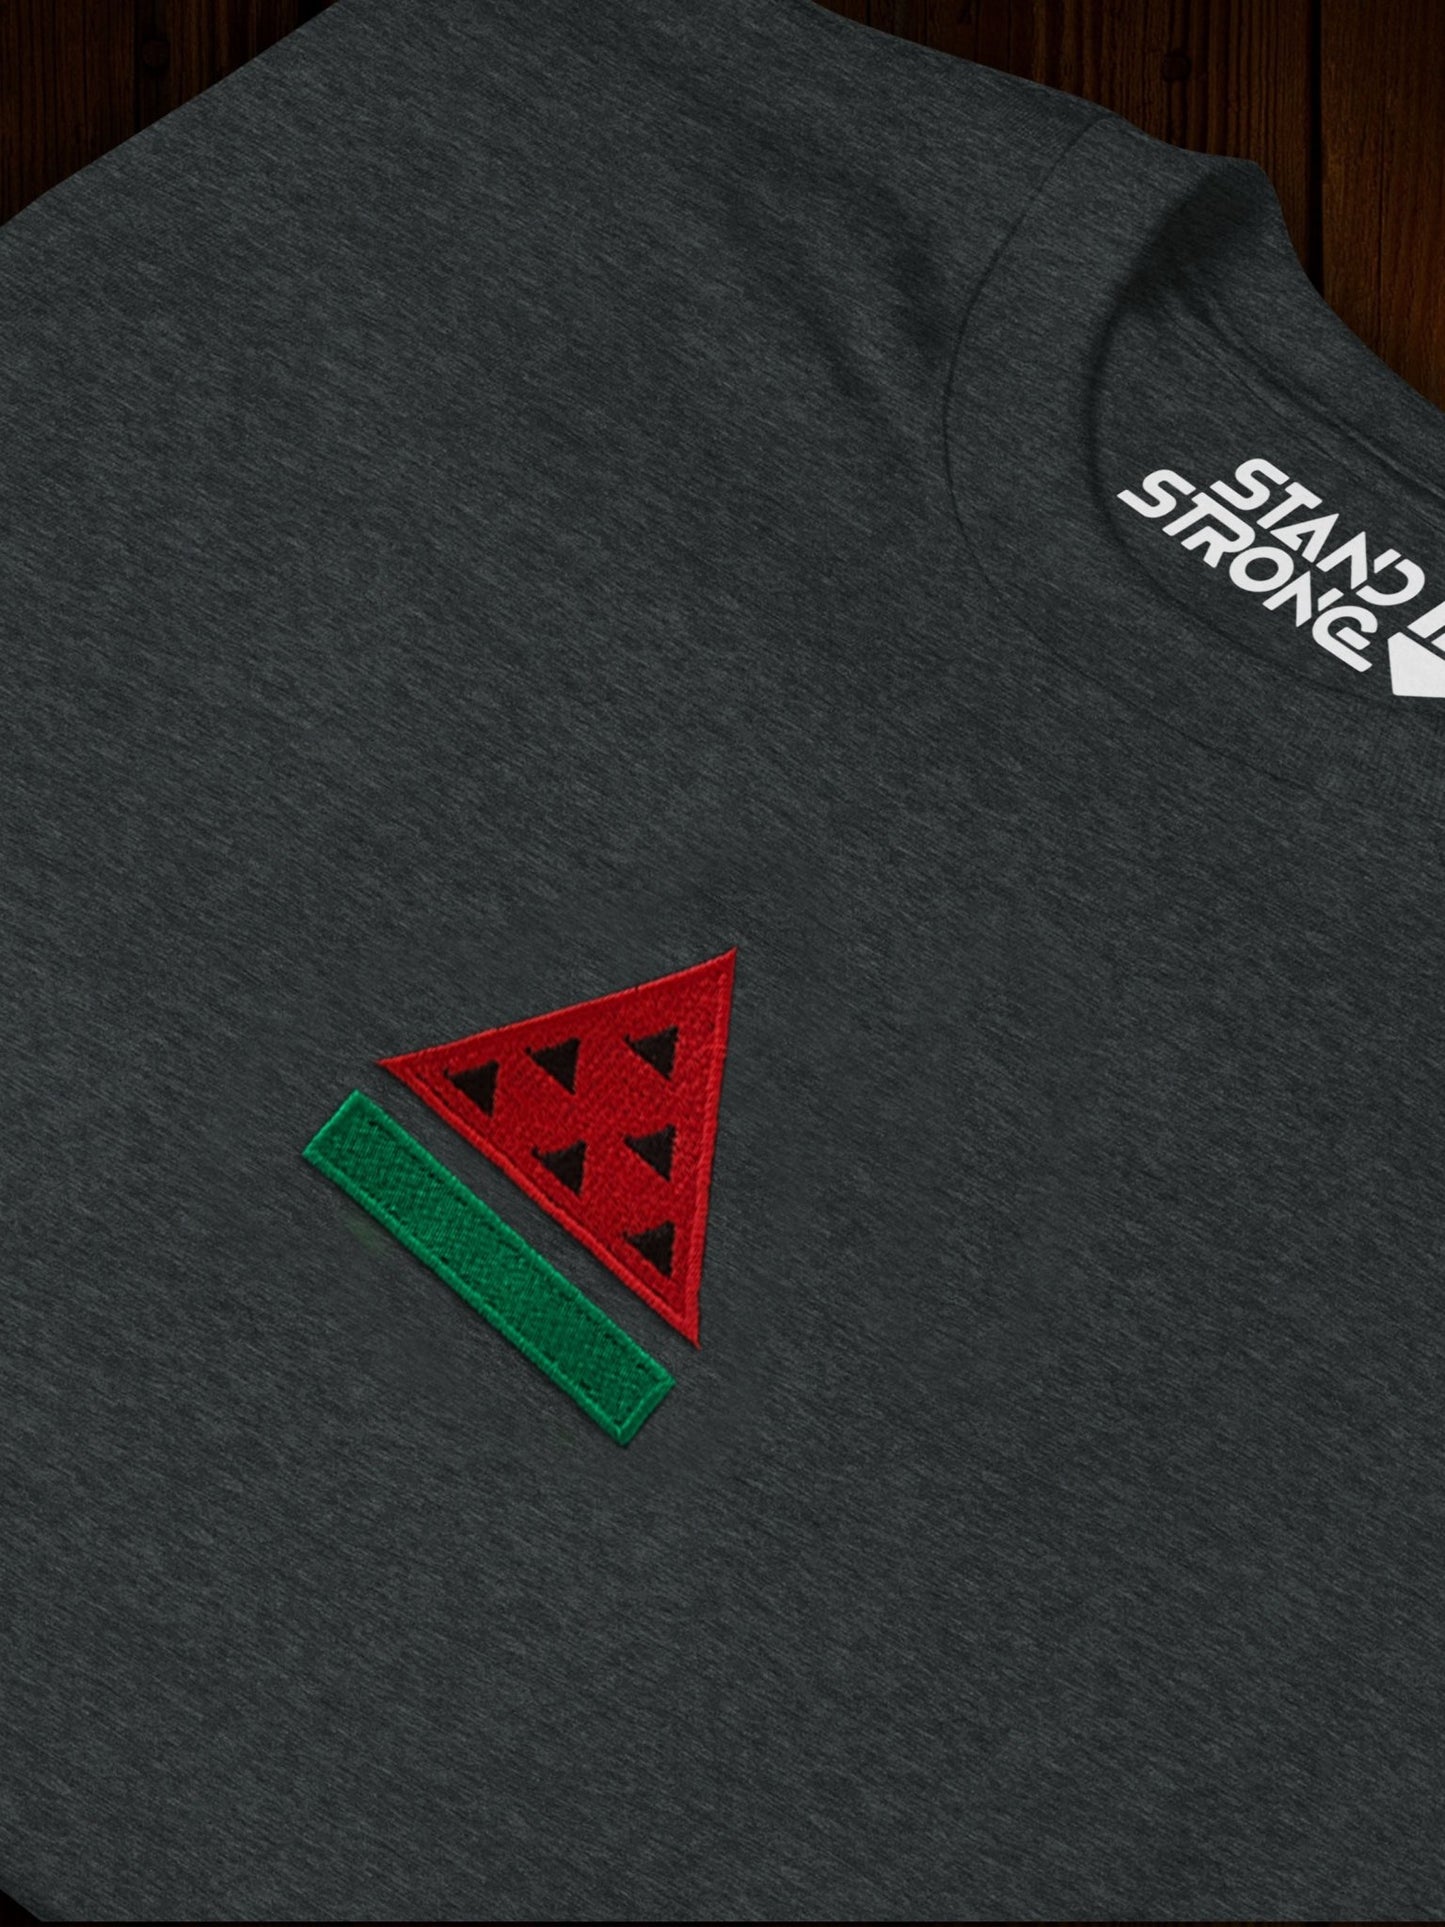 Special Edition Embroidered "Watermelon" Tee - StandUpStrong